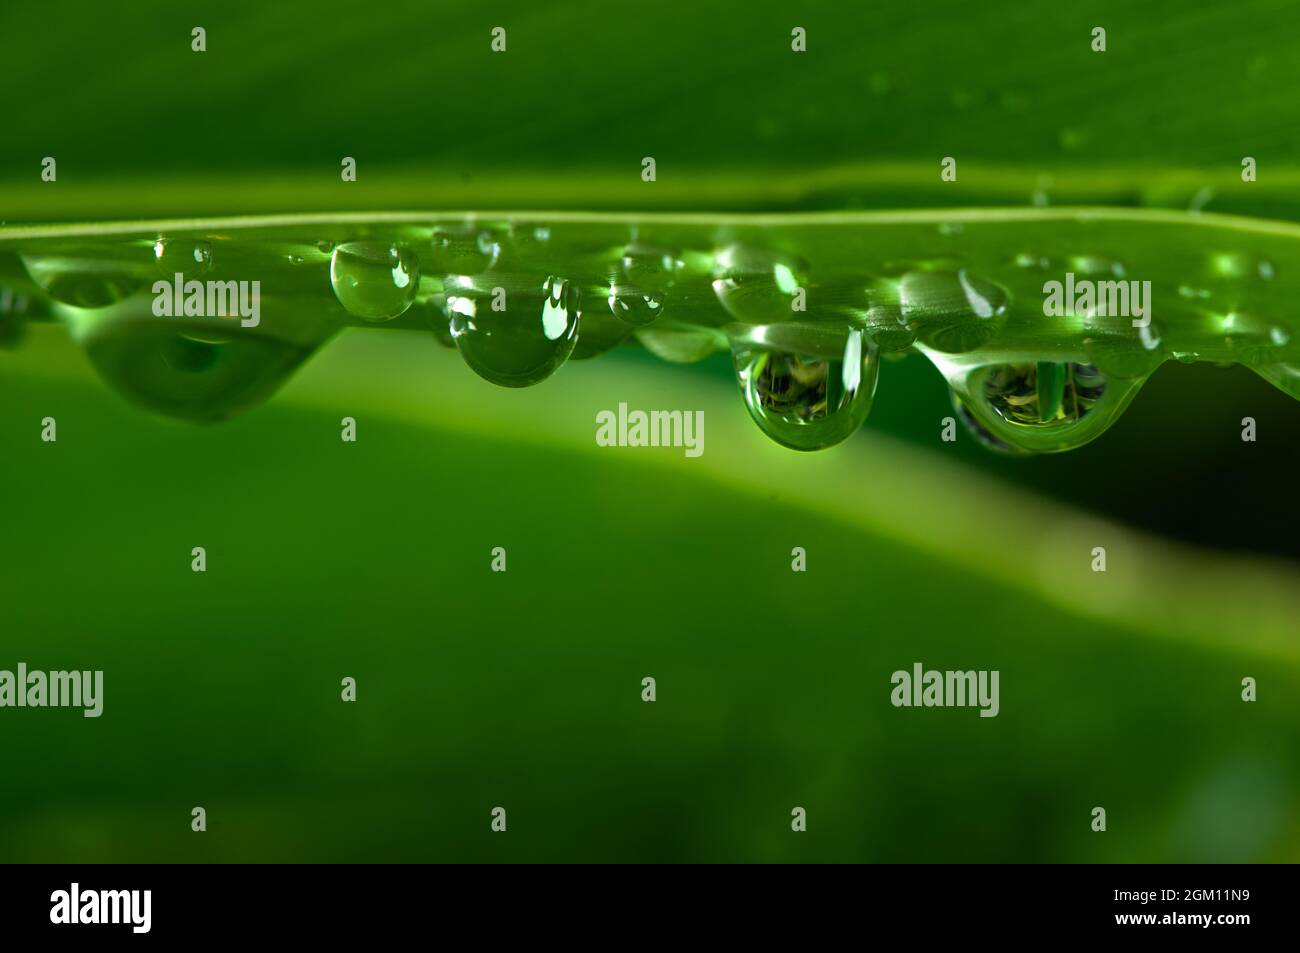 Water drops on green leaf. Stock Photo